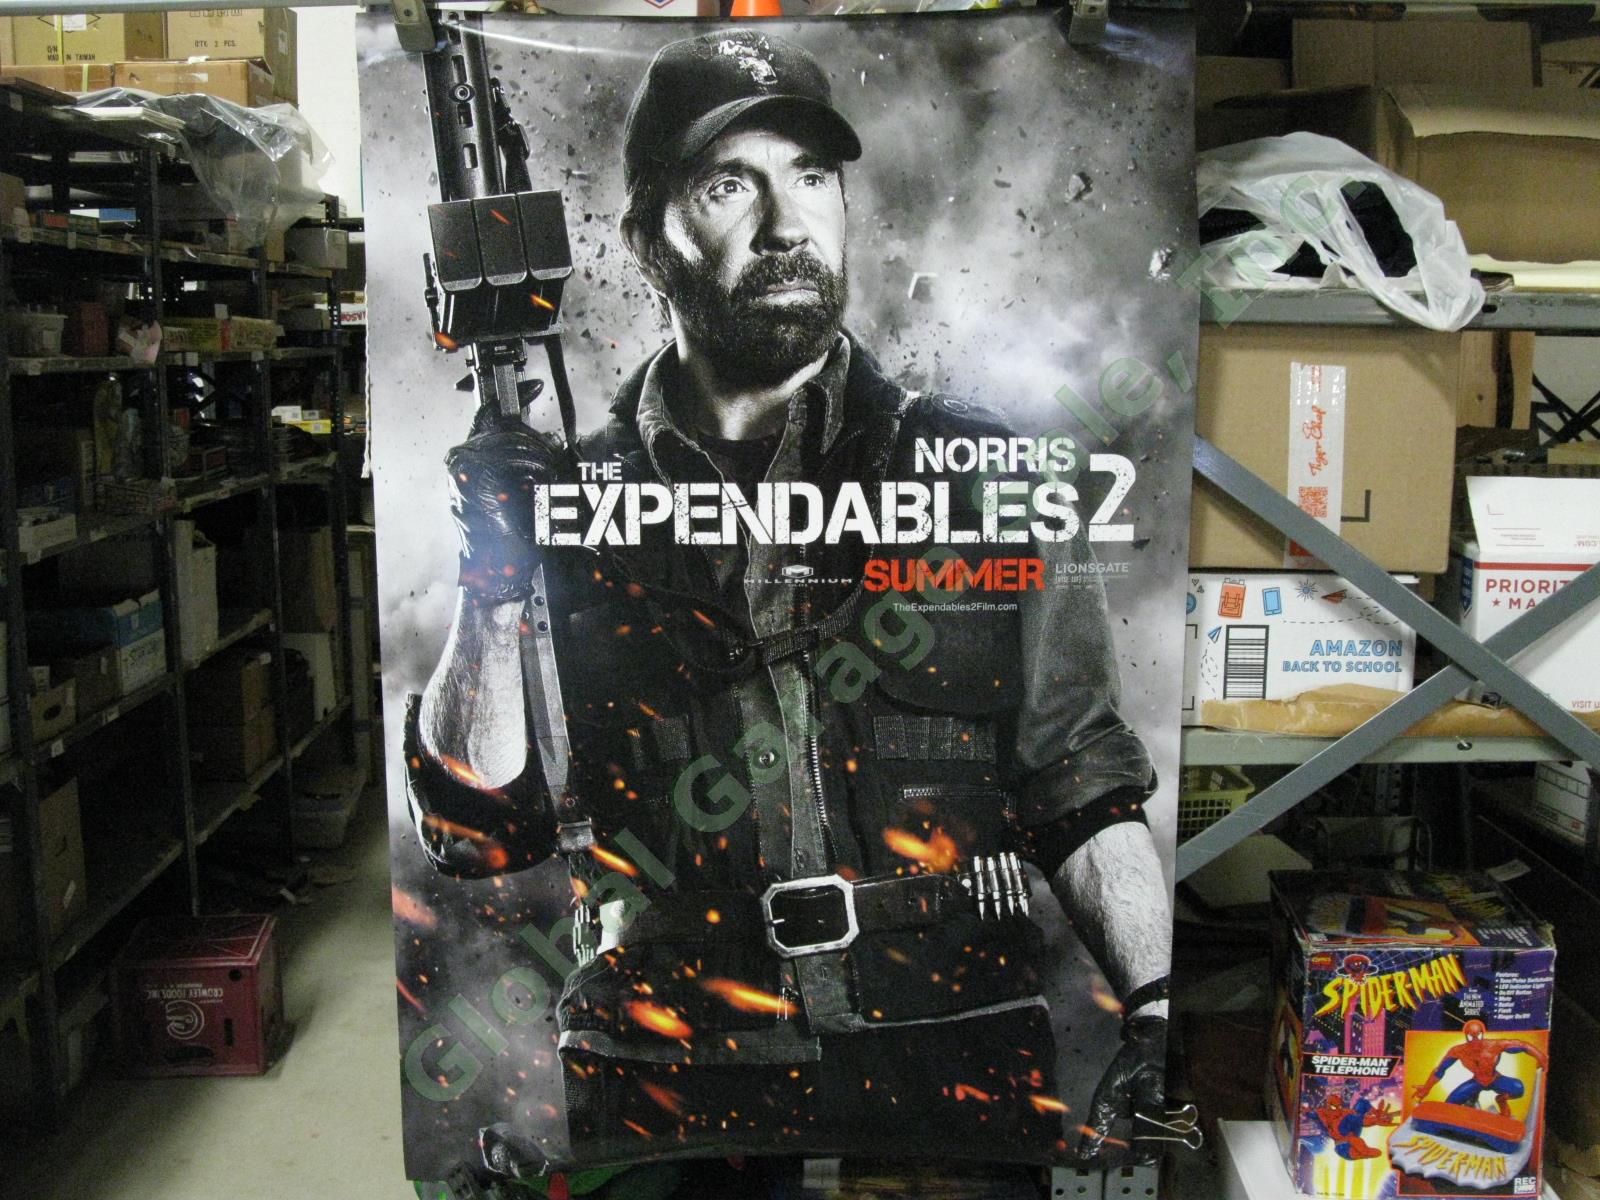 Expendables 2 Chuck Norris Booker Original Movie Theater Lobby Display Poster